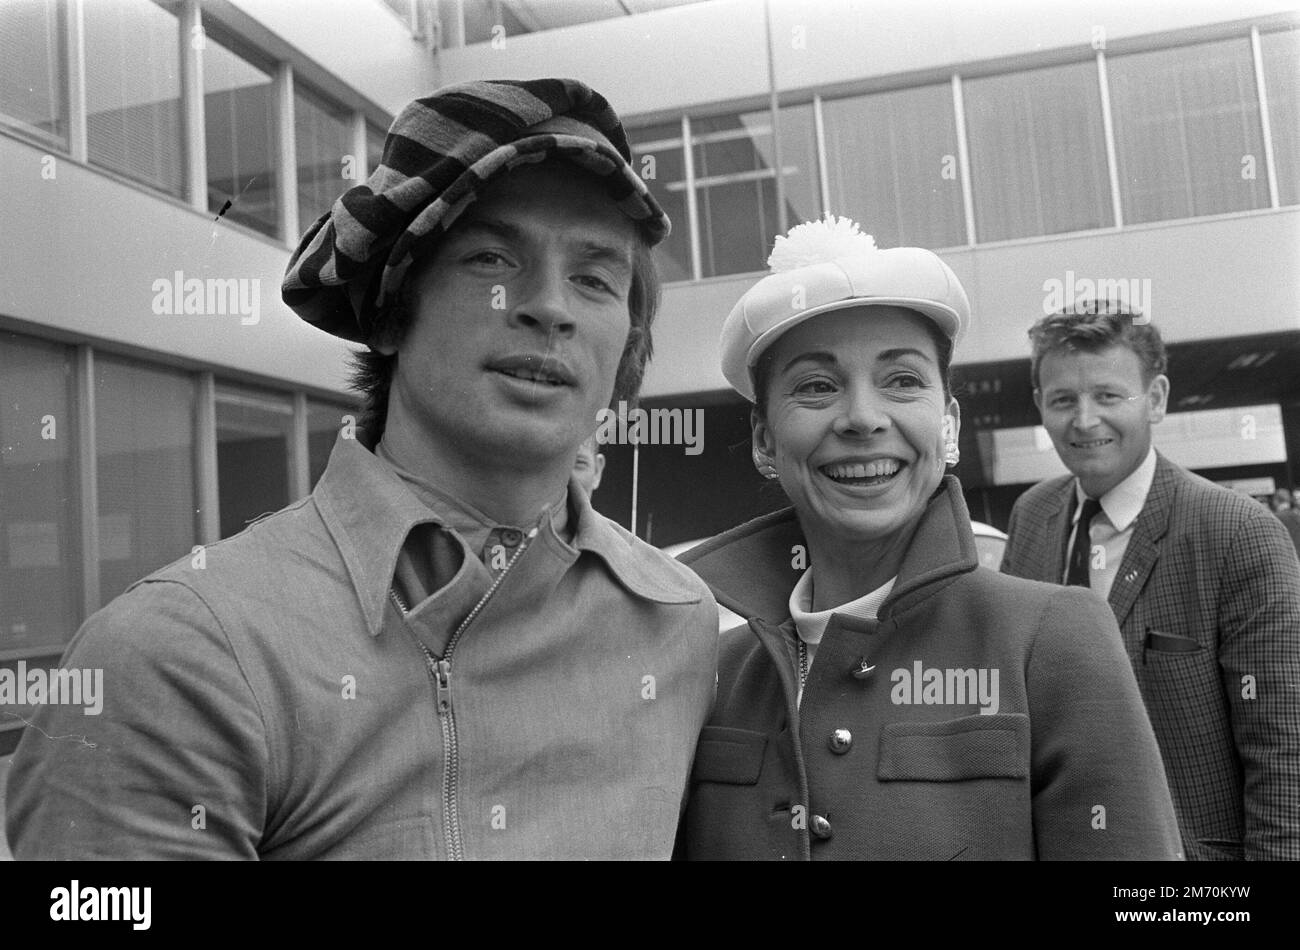 AMSTERDAM, THE NETHERLANDS - 10 July 1968 - Margot Fonteyn and Rudolf Nurejev shortly after arriving at Schiphol Airport near Amsterdam, The Netherlan Stock Photo